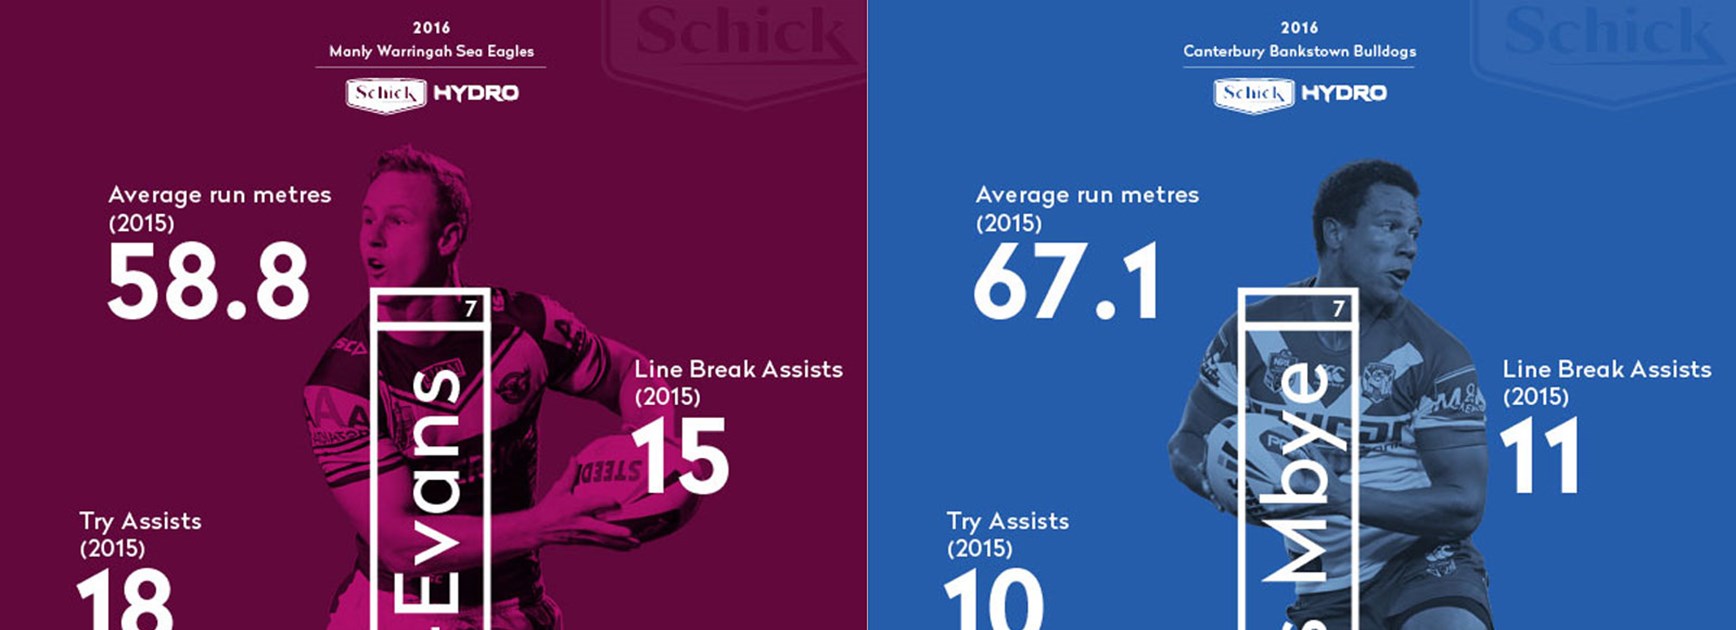 Manly halfback Daly Cherry-Evans and Bulldogs playmaker Moses Mbye both loom as key figures for their teams in 2016.